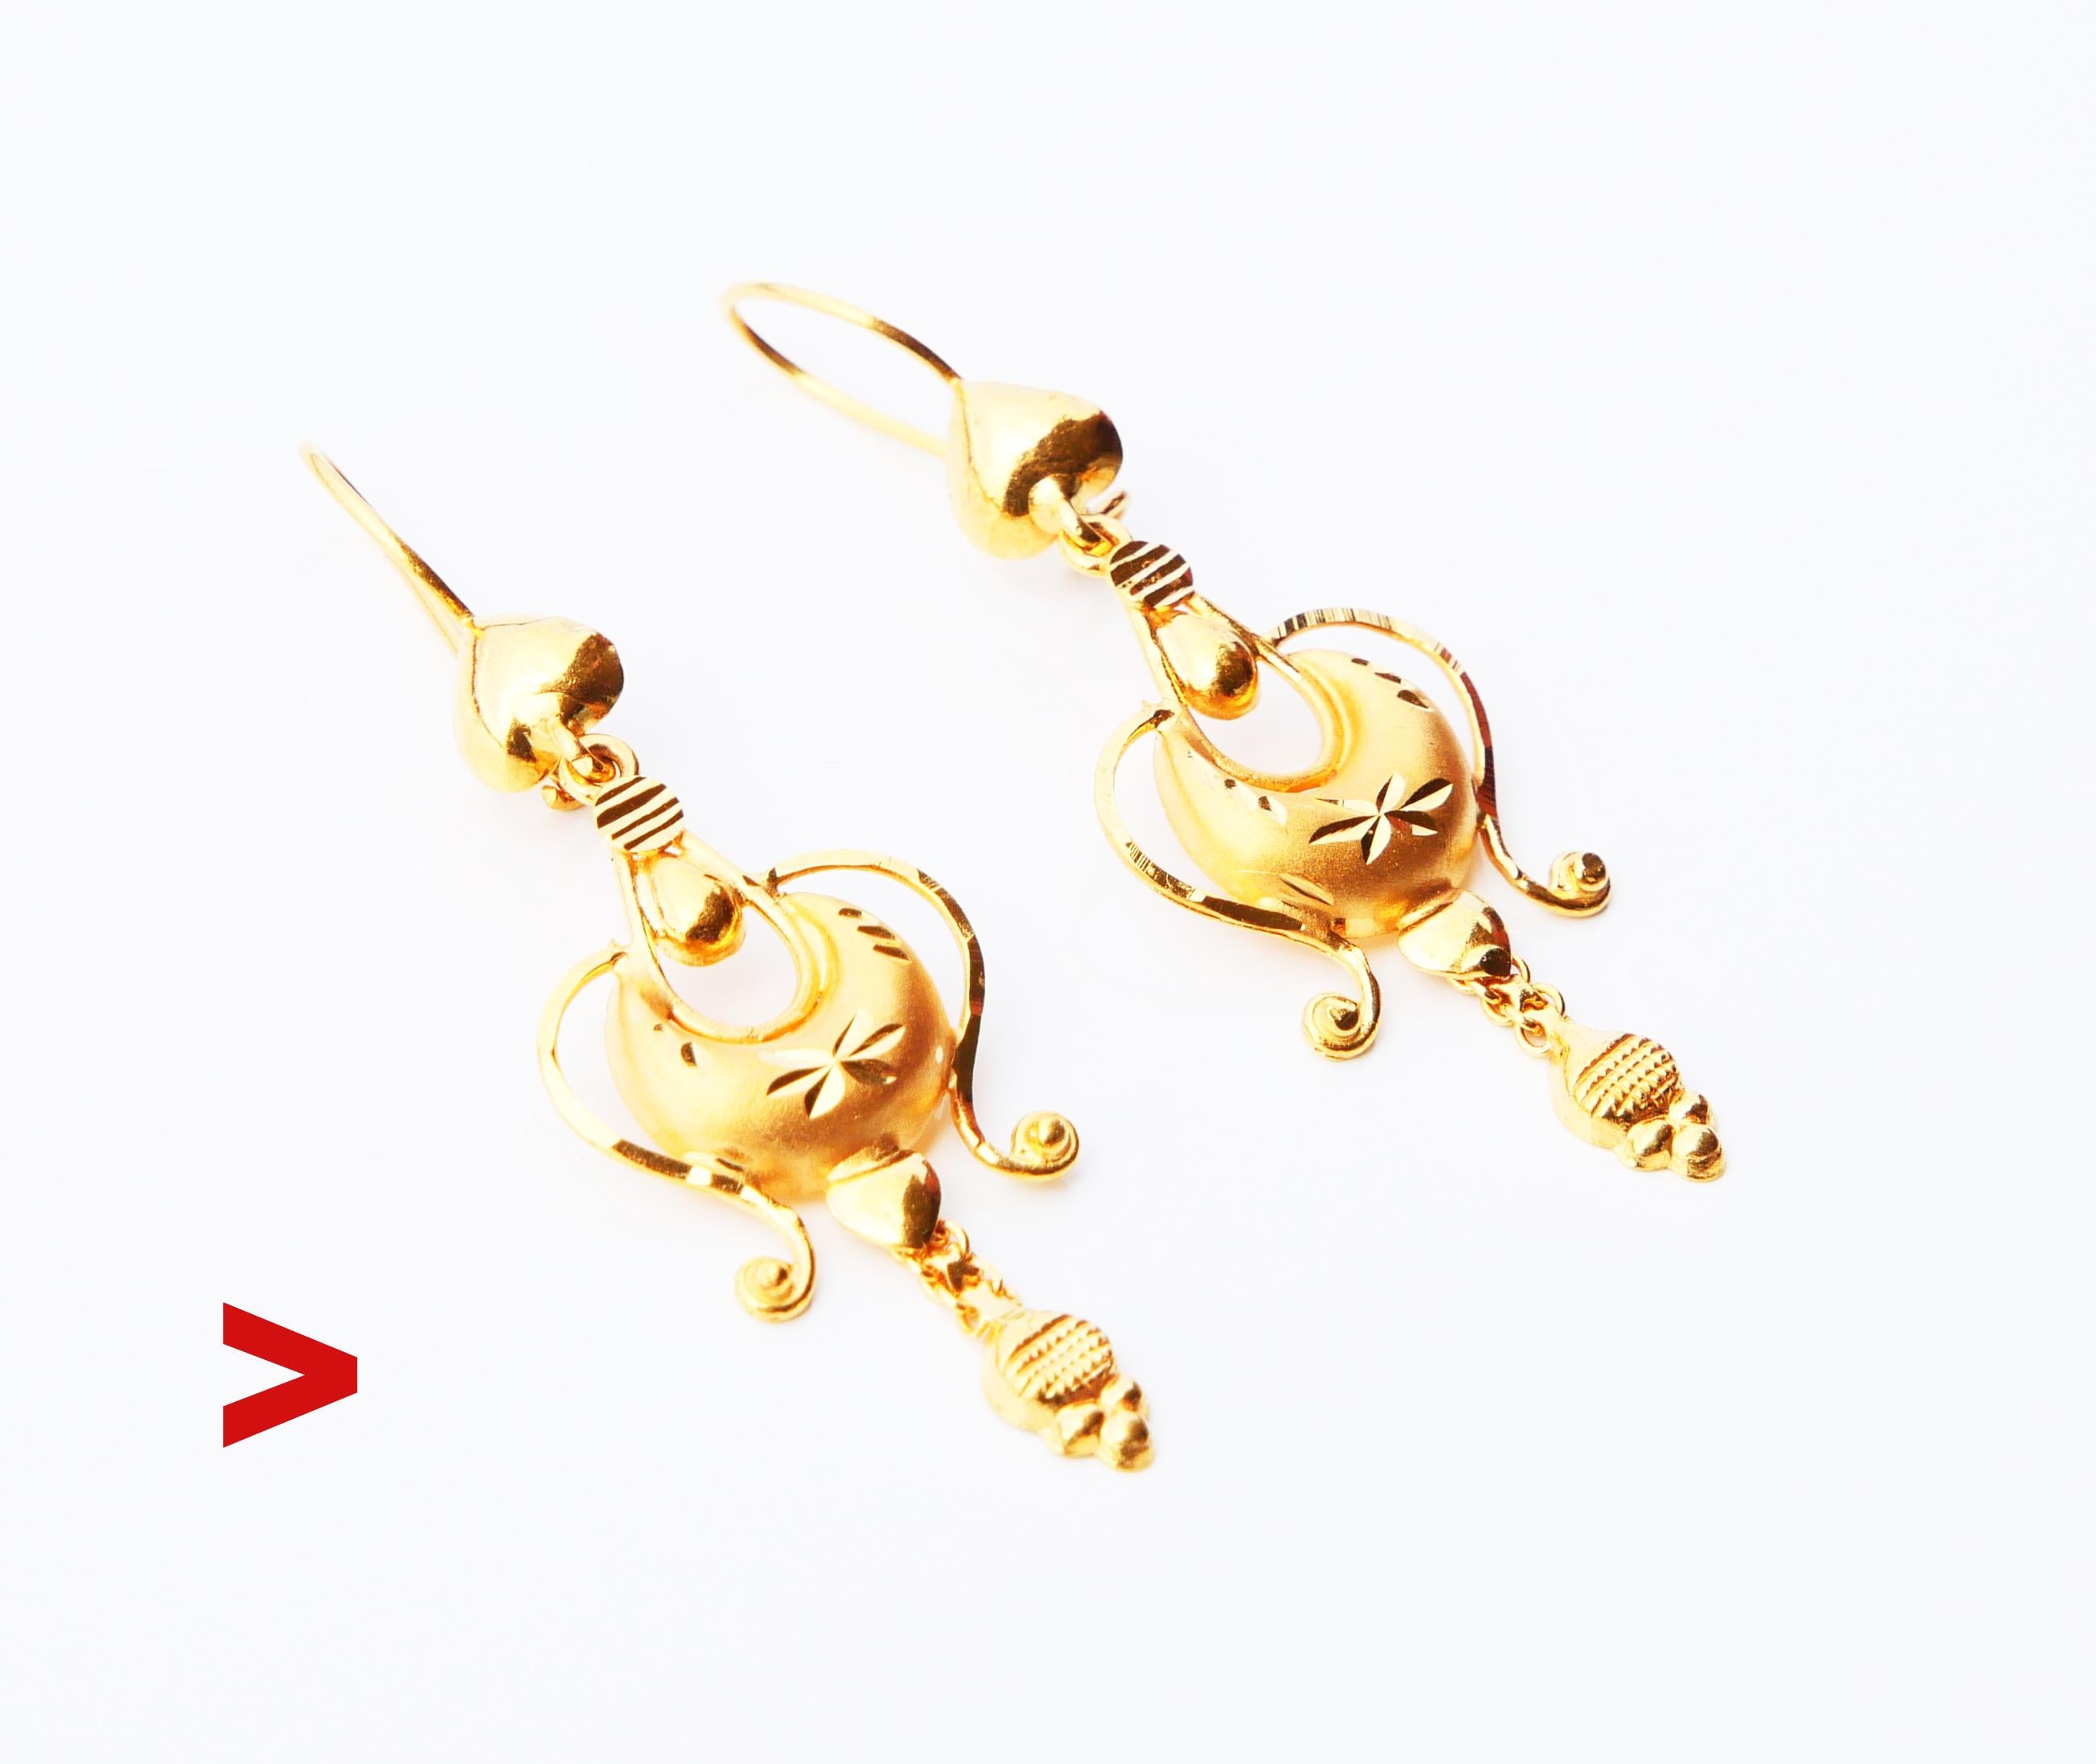 A pair of fancy dangles on hooks with multiple joined parts: some of them have satin surfaces, some polished and faceted to play with light. Hallmarked 21K, maker and exact period of manufacture unknown. Metal tested solid 21K Gold.

Each earring is